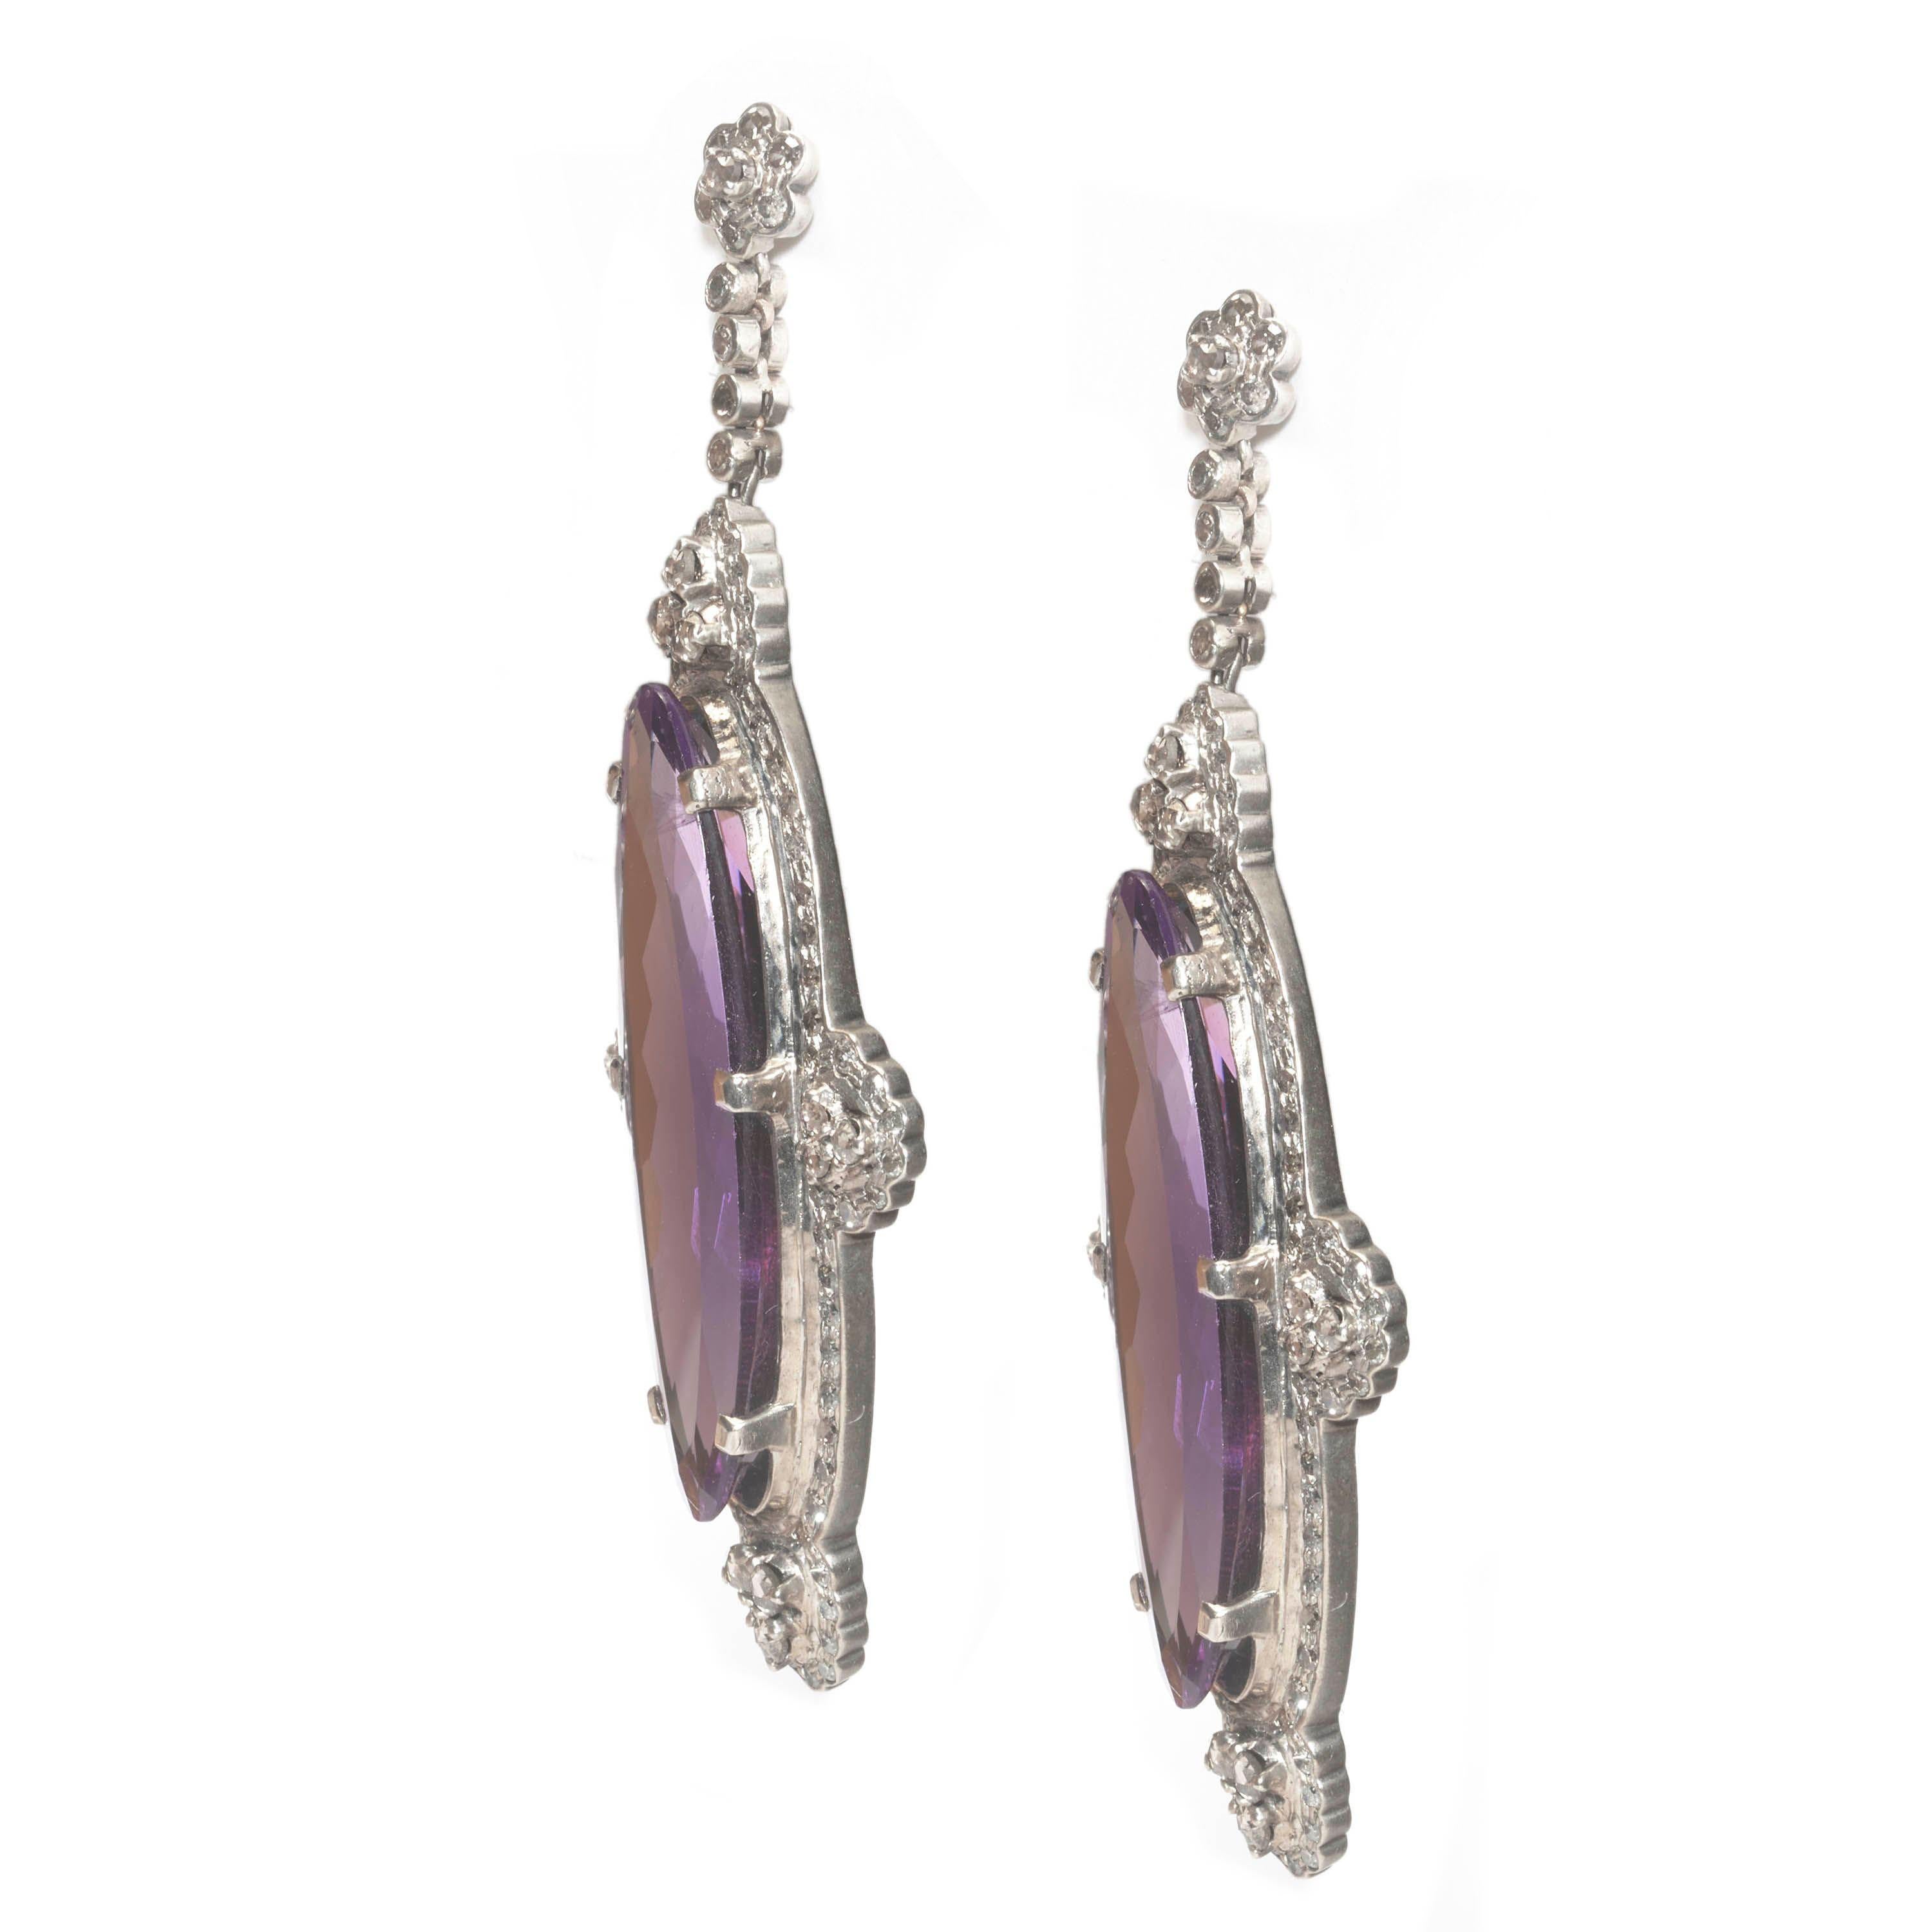 A pair of modern amethyst and diamond earrings, set with long oval faceted amethysts, weighing approximately 40.00ct, surrounded by eight-cut diamonds, with rose-cut diamond set trefoil clusters at each quarter, with rose-cut diamond set cluster